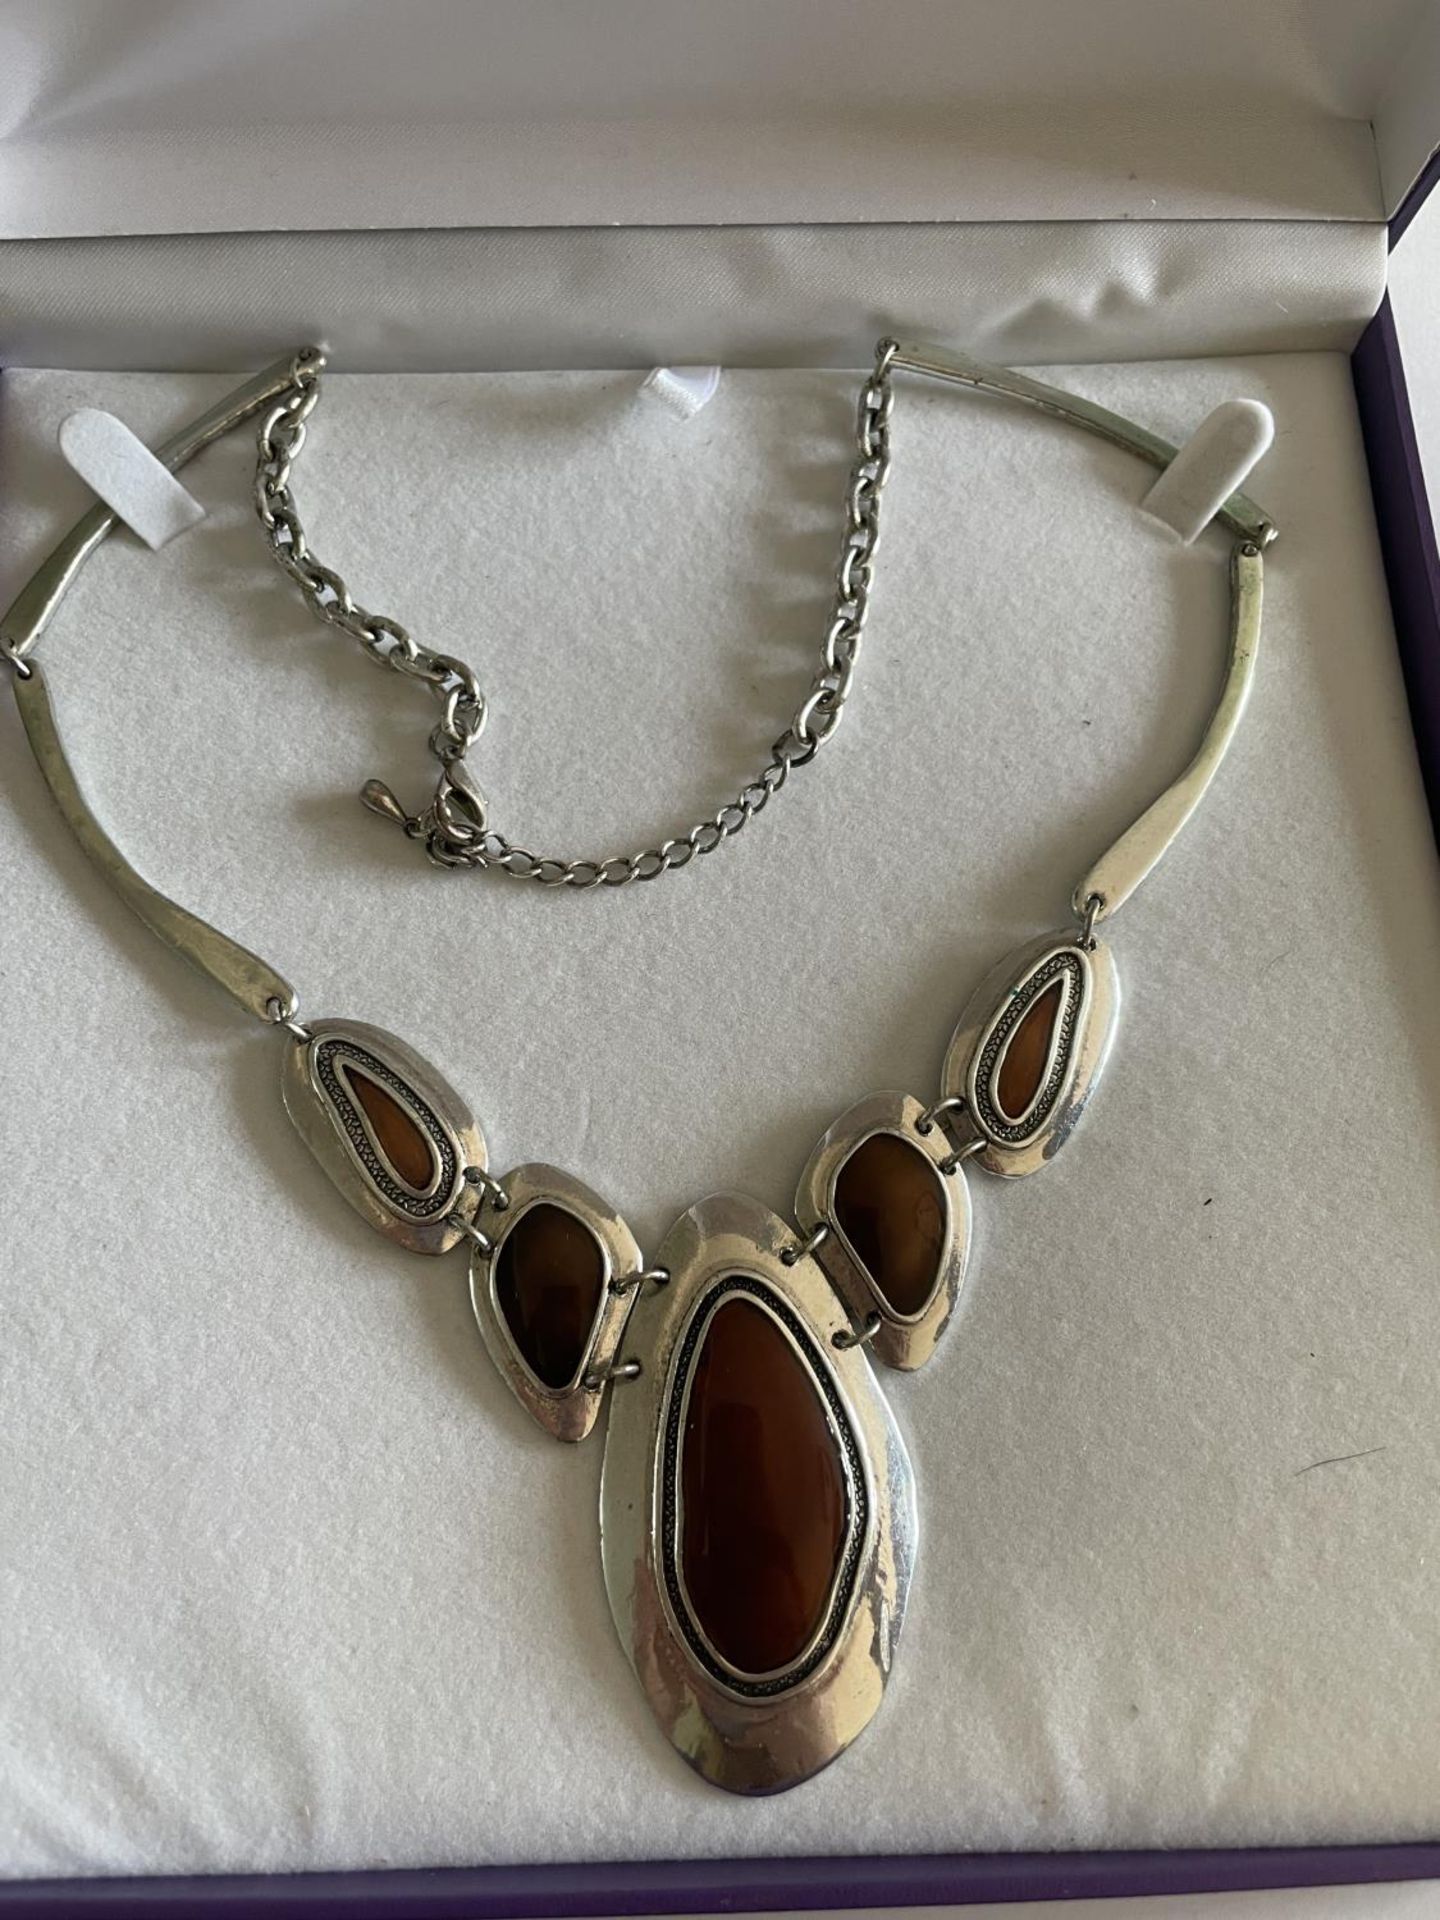 A SILVER ABSTRACT DESIGN NECKLACE WITH AMBER COLOURED STONES IN A PRESENTATION BOX - Image 2 of 3